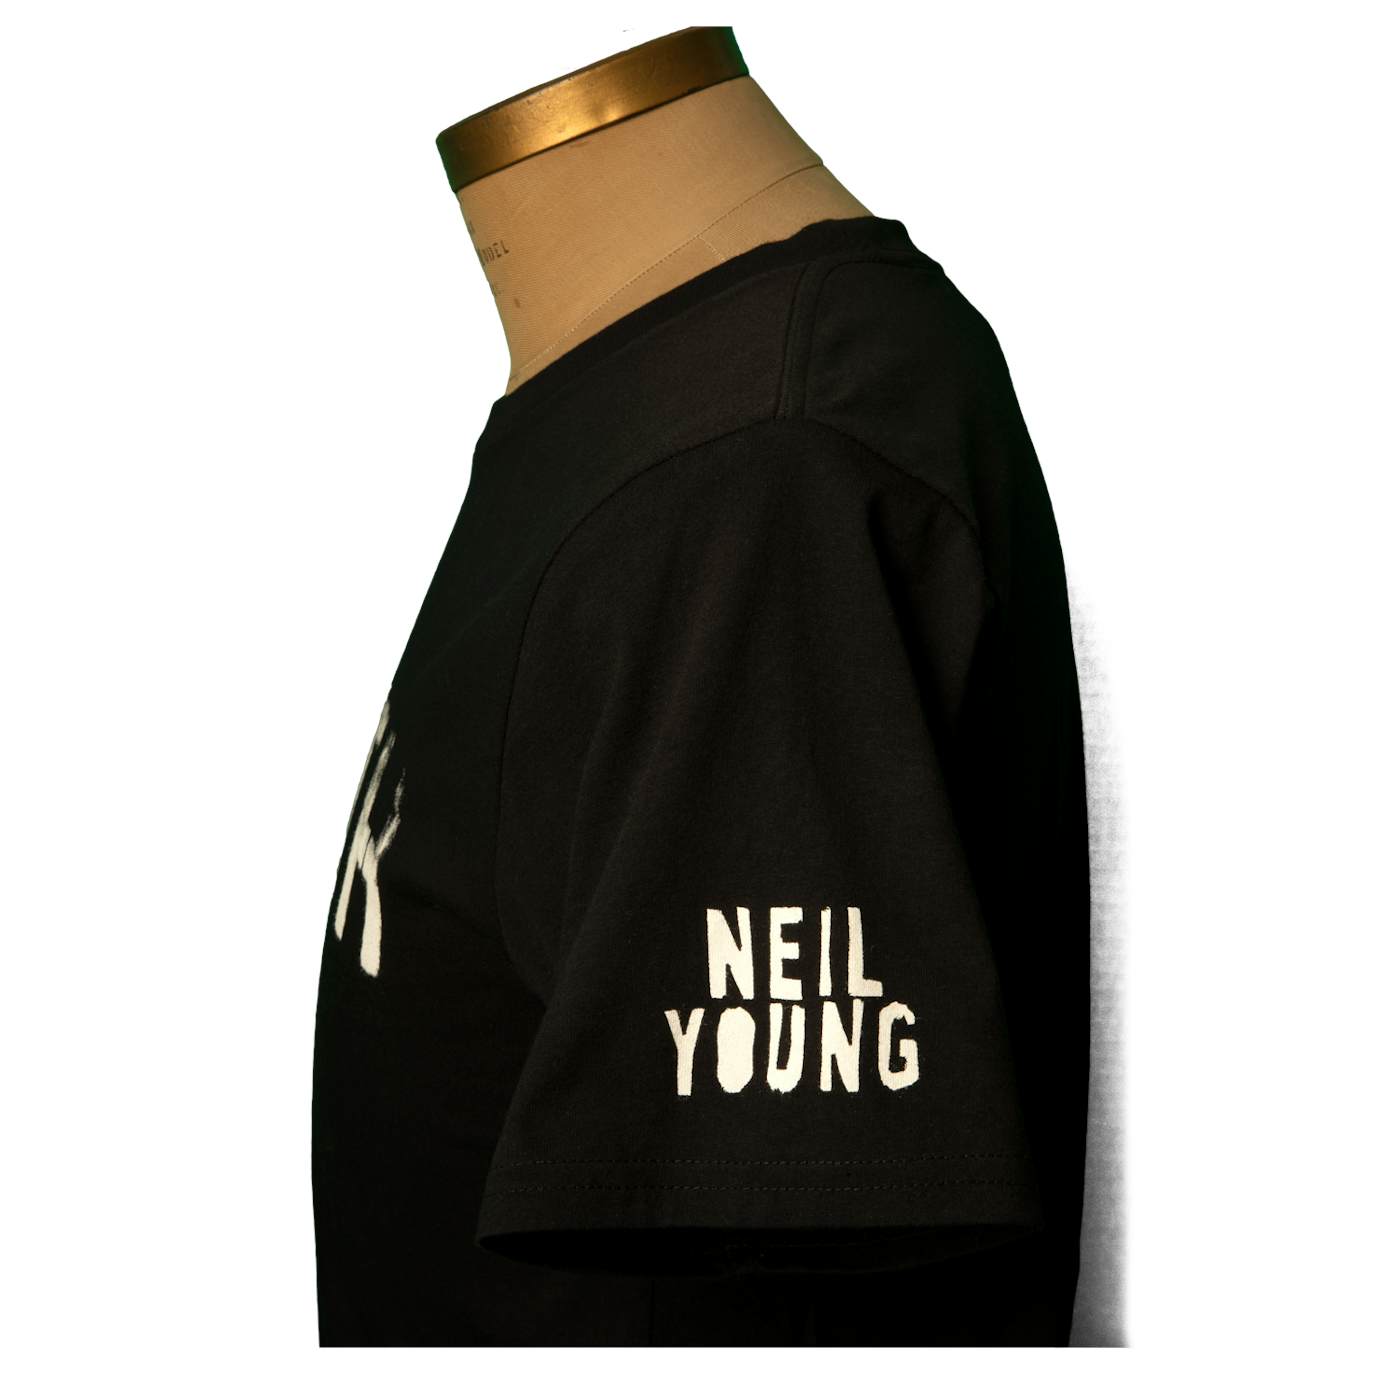 Neil Young Earth T-Shirt